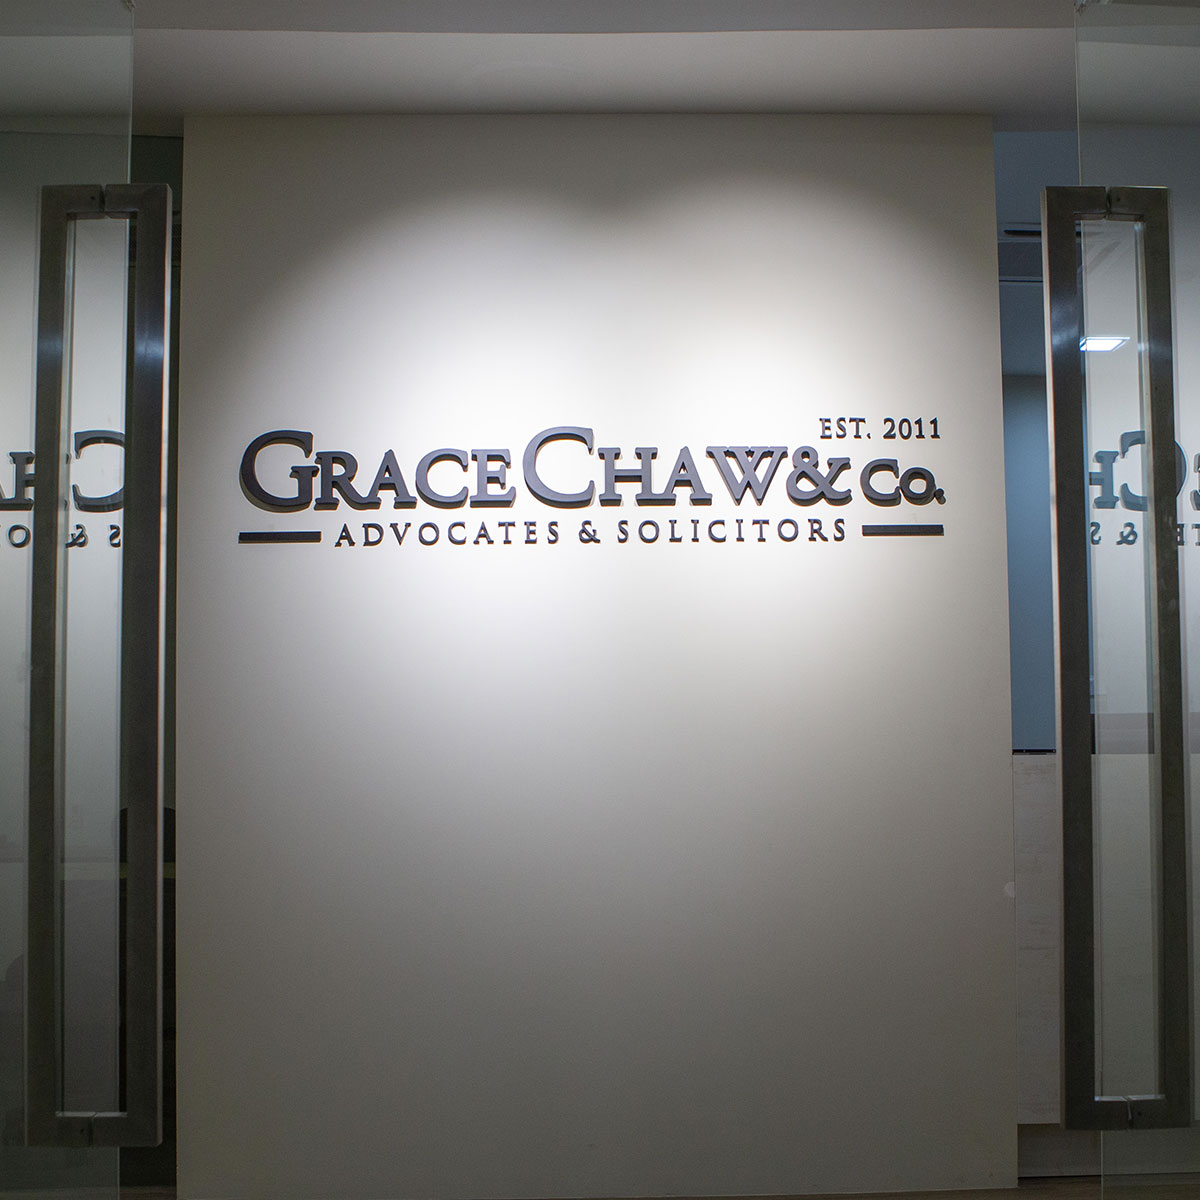 Dispute resolution and litigation based in Sabah - Grace Chaw & Co